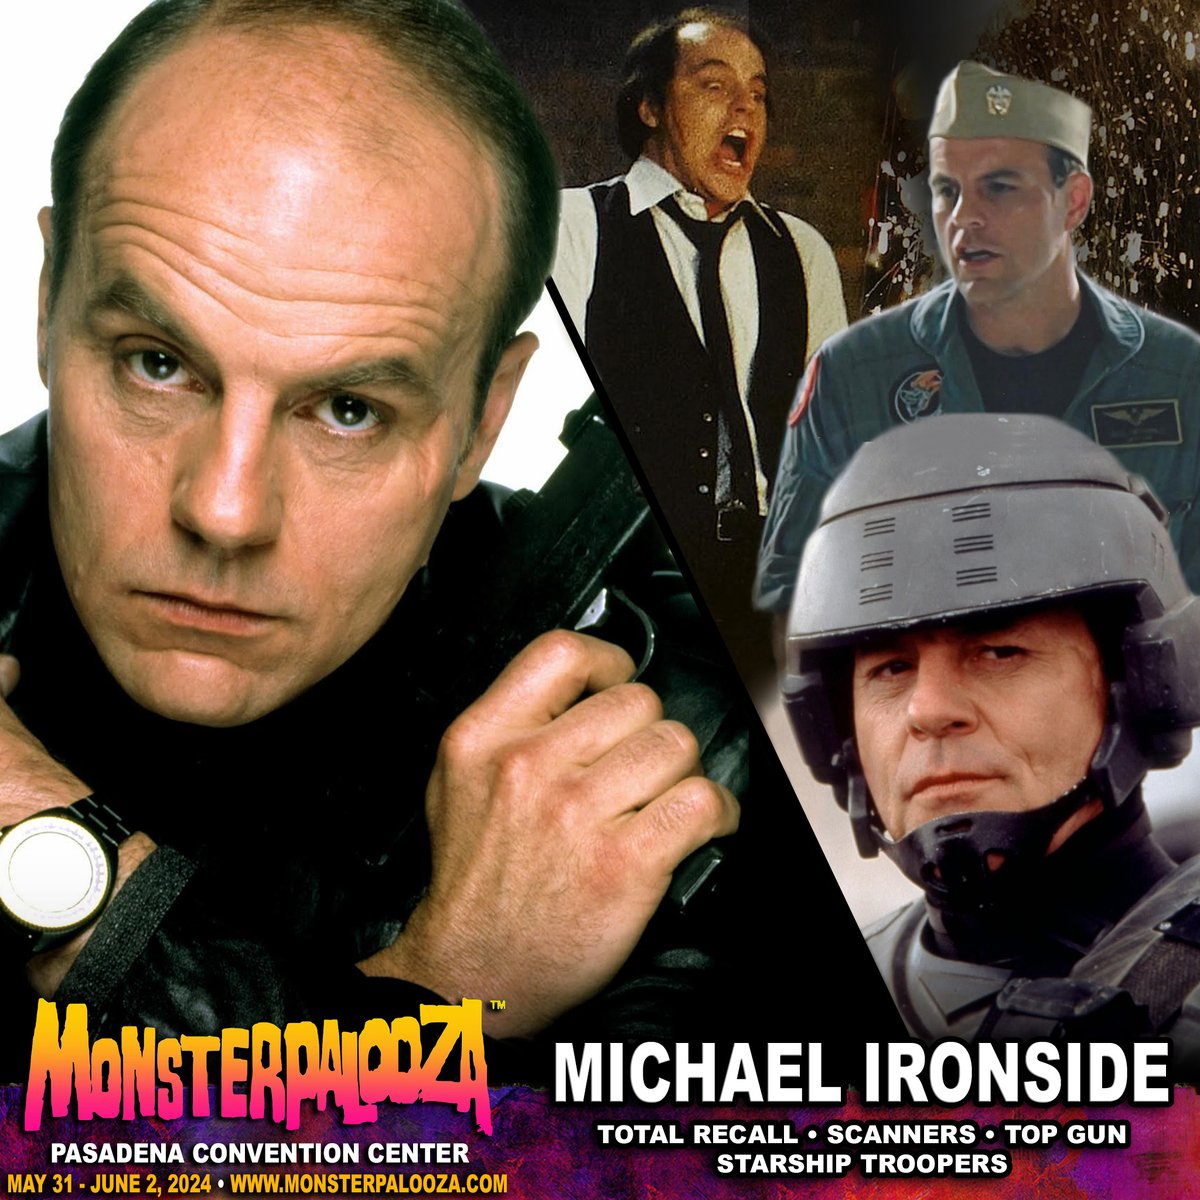 #TotalRecall... #Scanners... #TopGun... #StarshipTroopers...
MICHAEL IRONSIDE will be at #Monsterpalooza May 31-June 2 at The Pasadena Convention Center!
GET YOUR TICKETS IN ADVANCE!
For tickets, click here ➨ eventbrite.com/e/monsterpaloo…